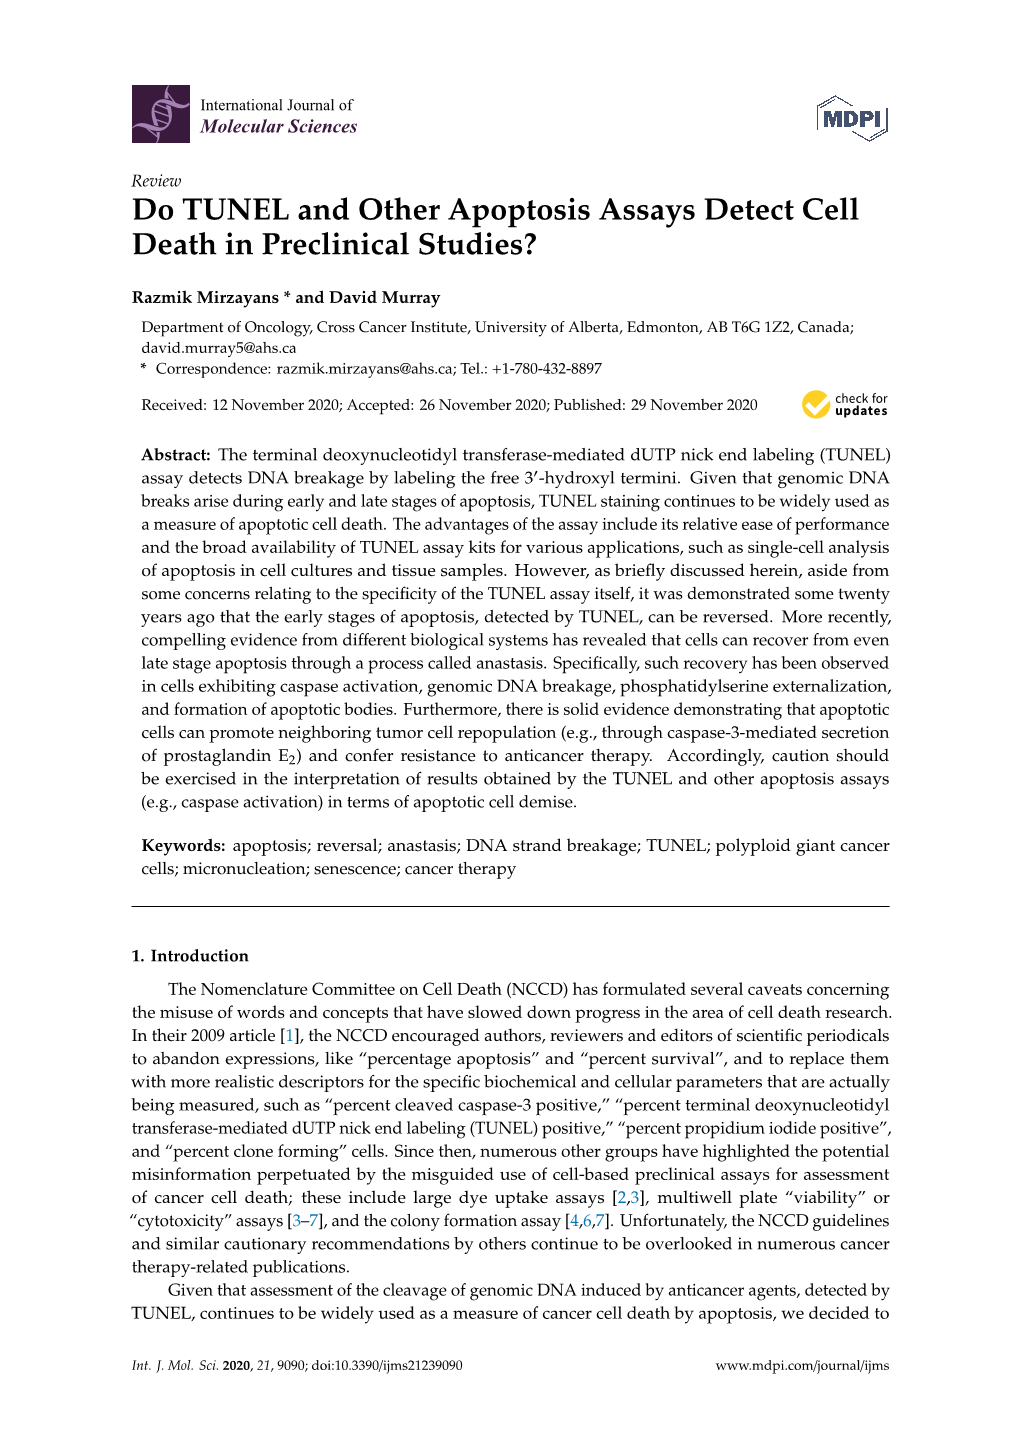 Do TUNEL and Other Apoptosis Assays Detect Cell Death in Preclinical Studies?